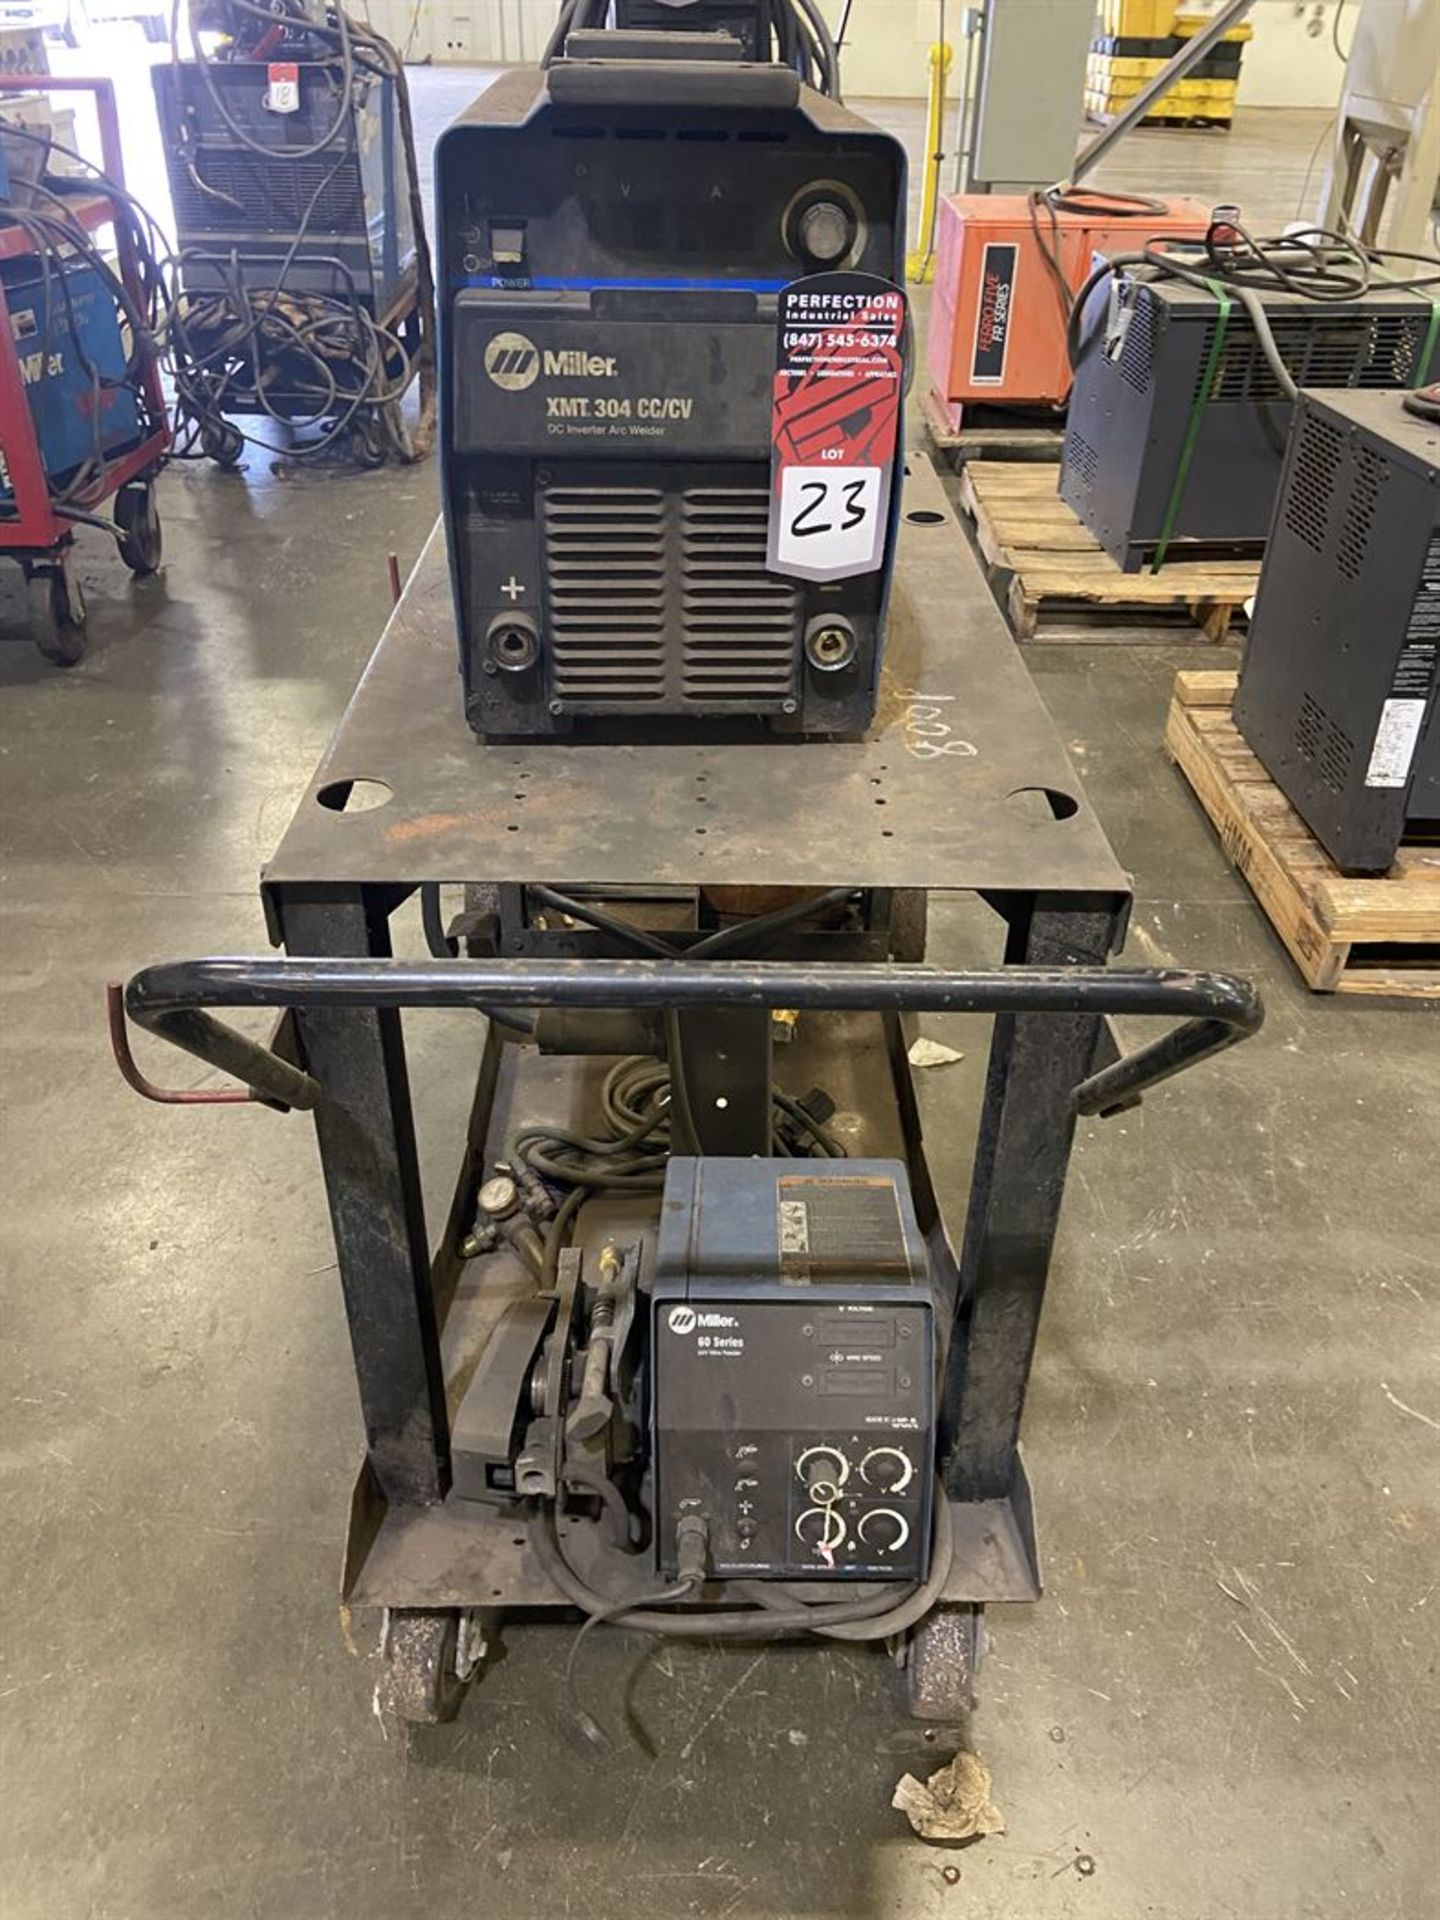 Miller XMT 304 CC/CV Welder with 60 Series Feed and Cart, s/n LA32_441`